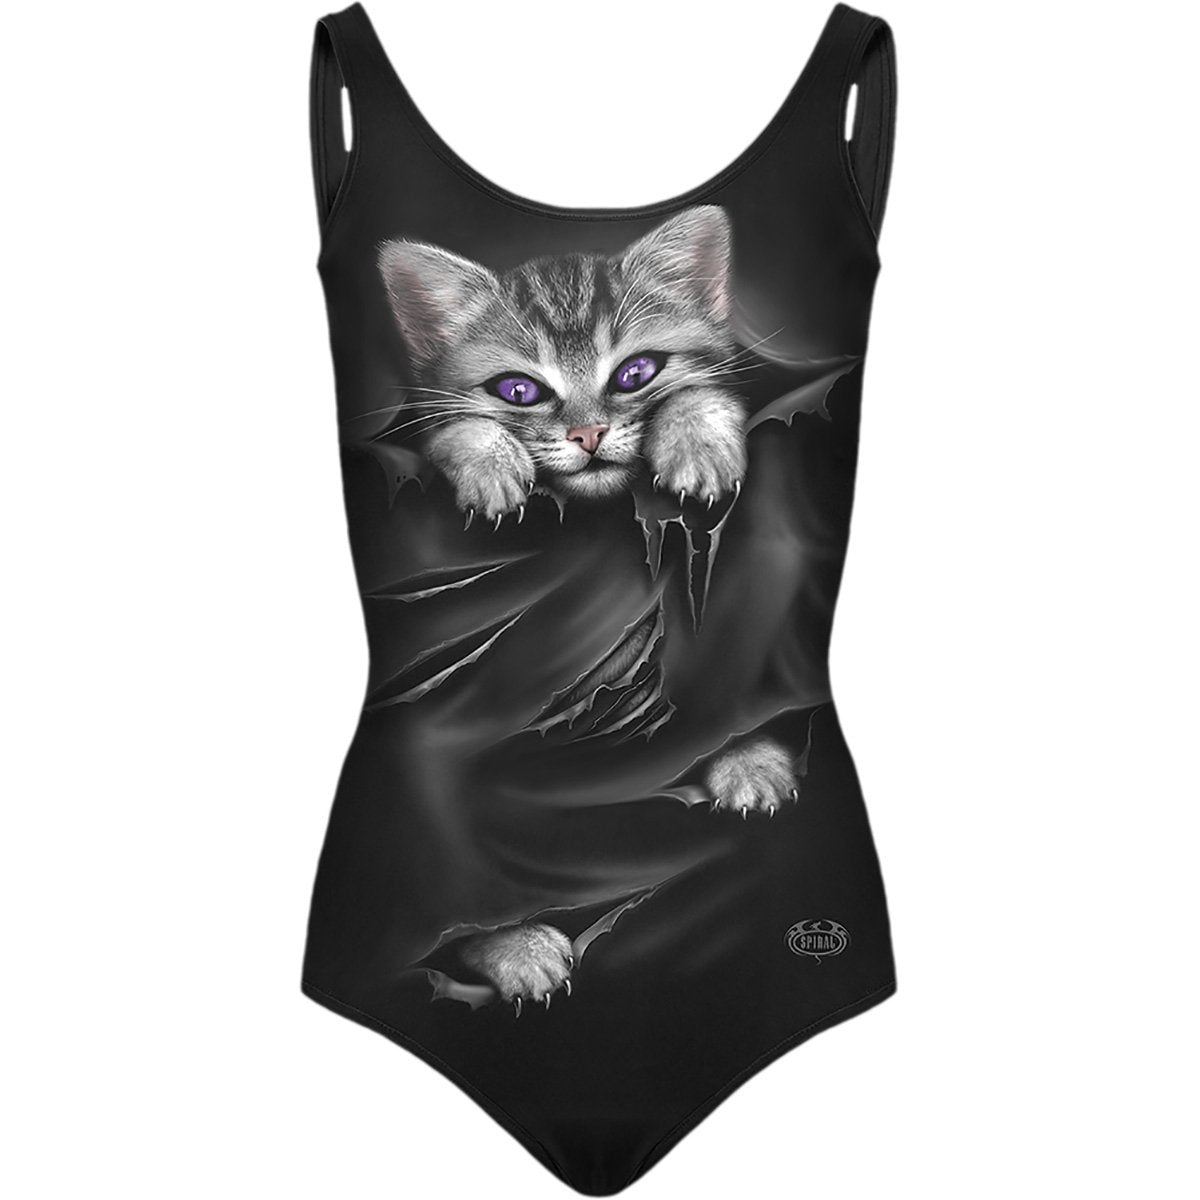 spiral direct bright eyes cat Allover Scoop Back Padded Swimsuit new with tags